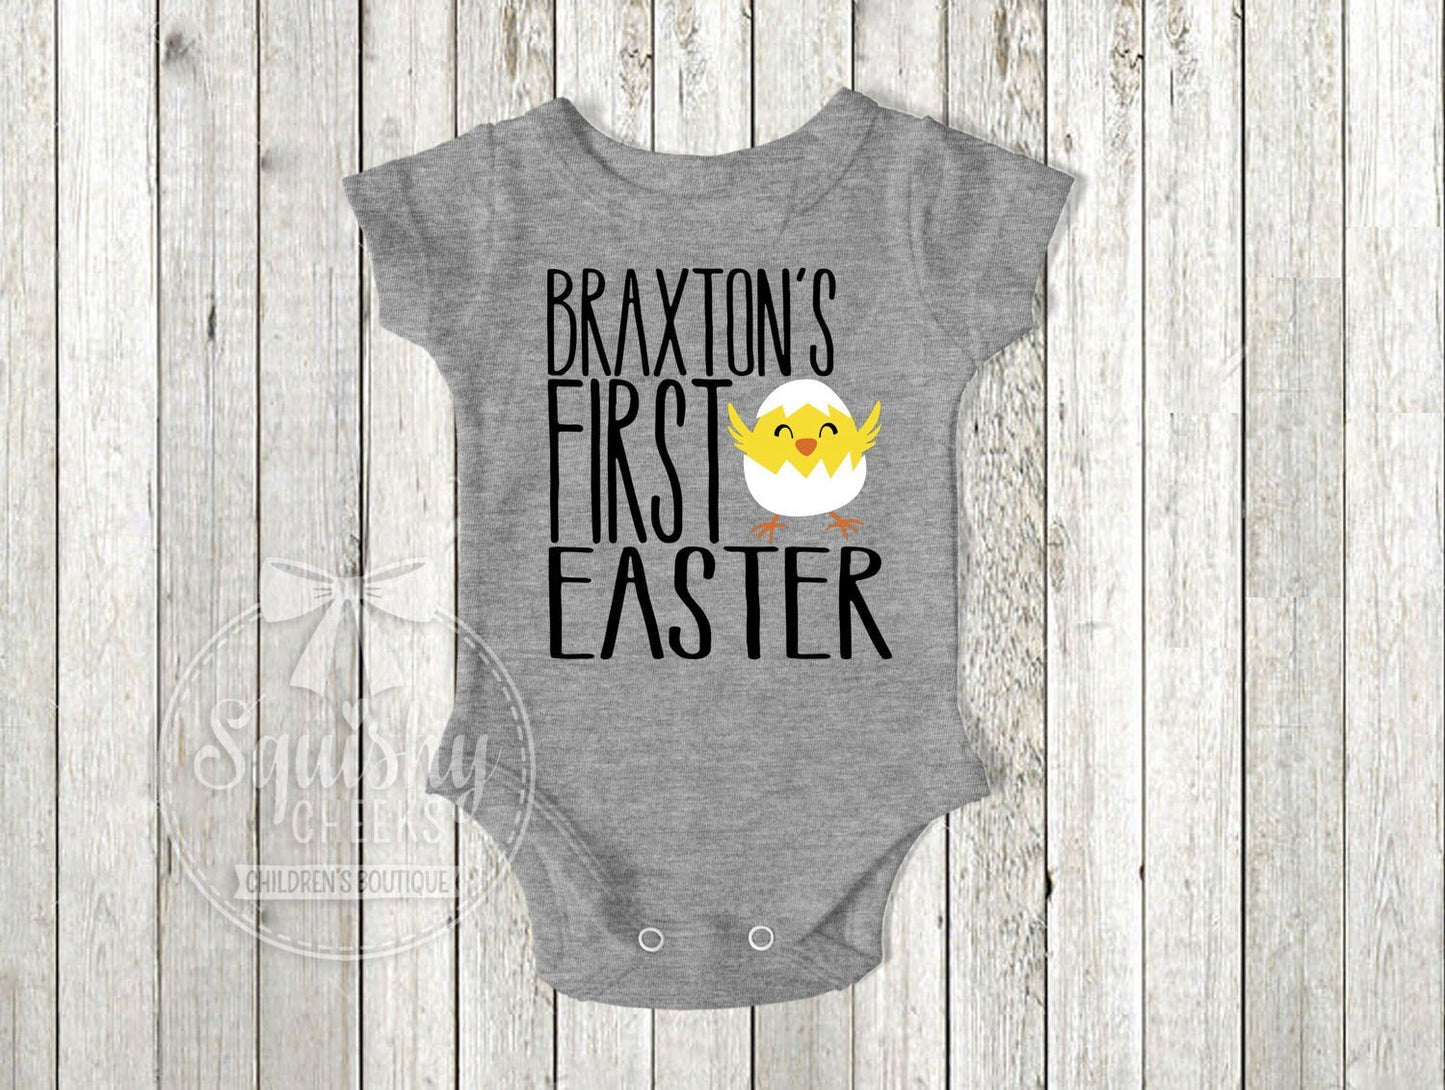 Boy 1st Easter Shirt, Boy's First Easter, Baby Boy Easter Outfit, Personalized Easter Shirt, Boy's Personalized Bodysuit, Easter Shirt - Squishy Cheeks